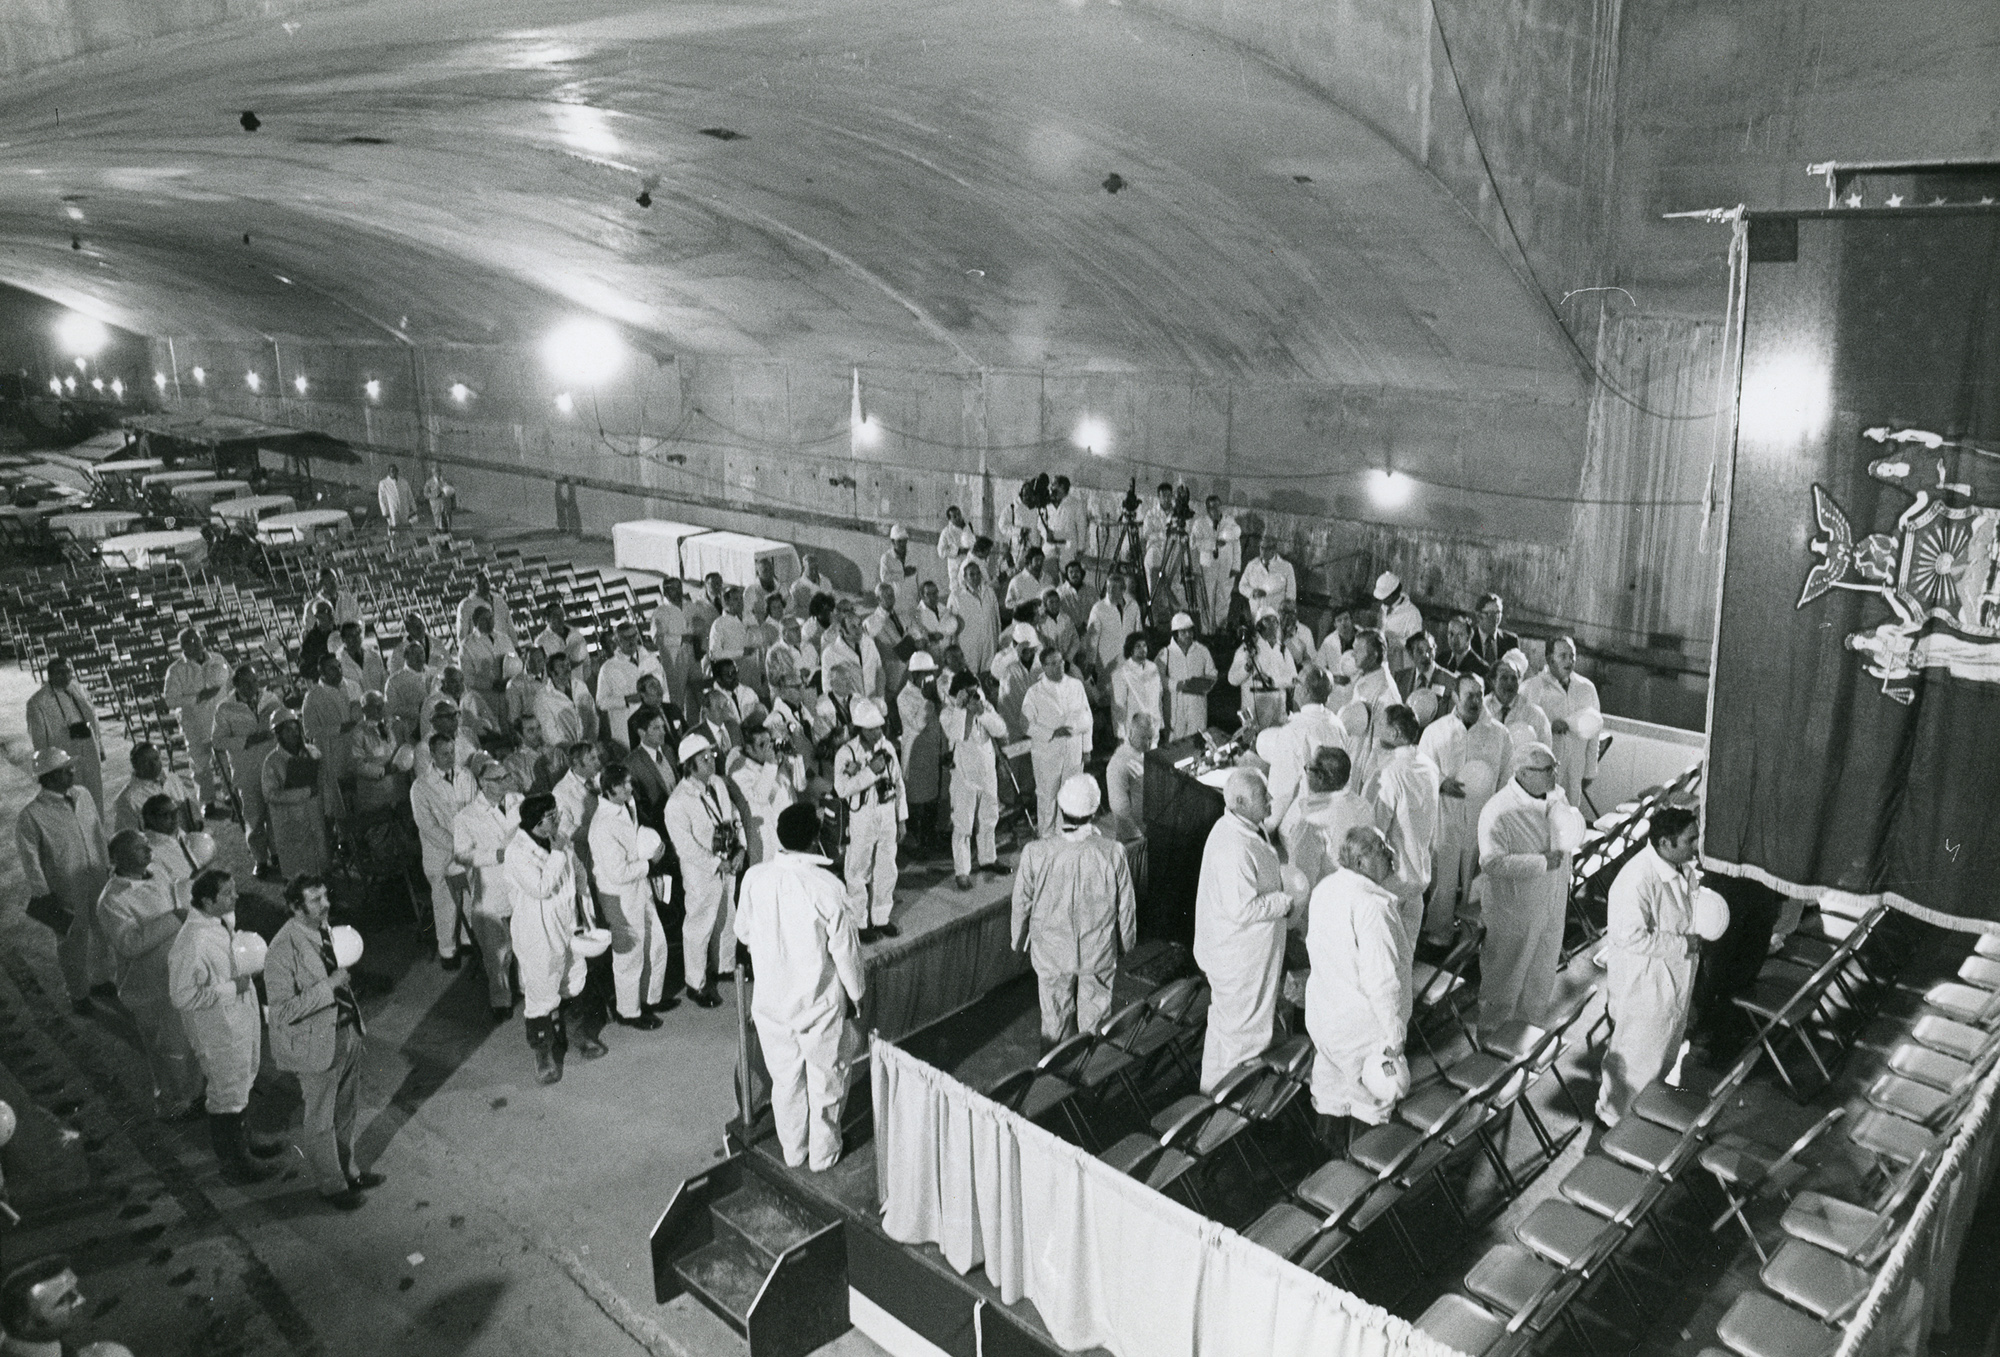 63rd Street Tunnel holing through ceremony, 1972